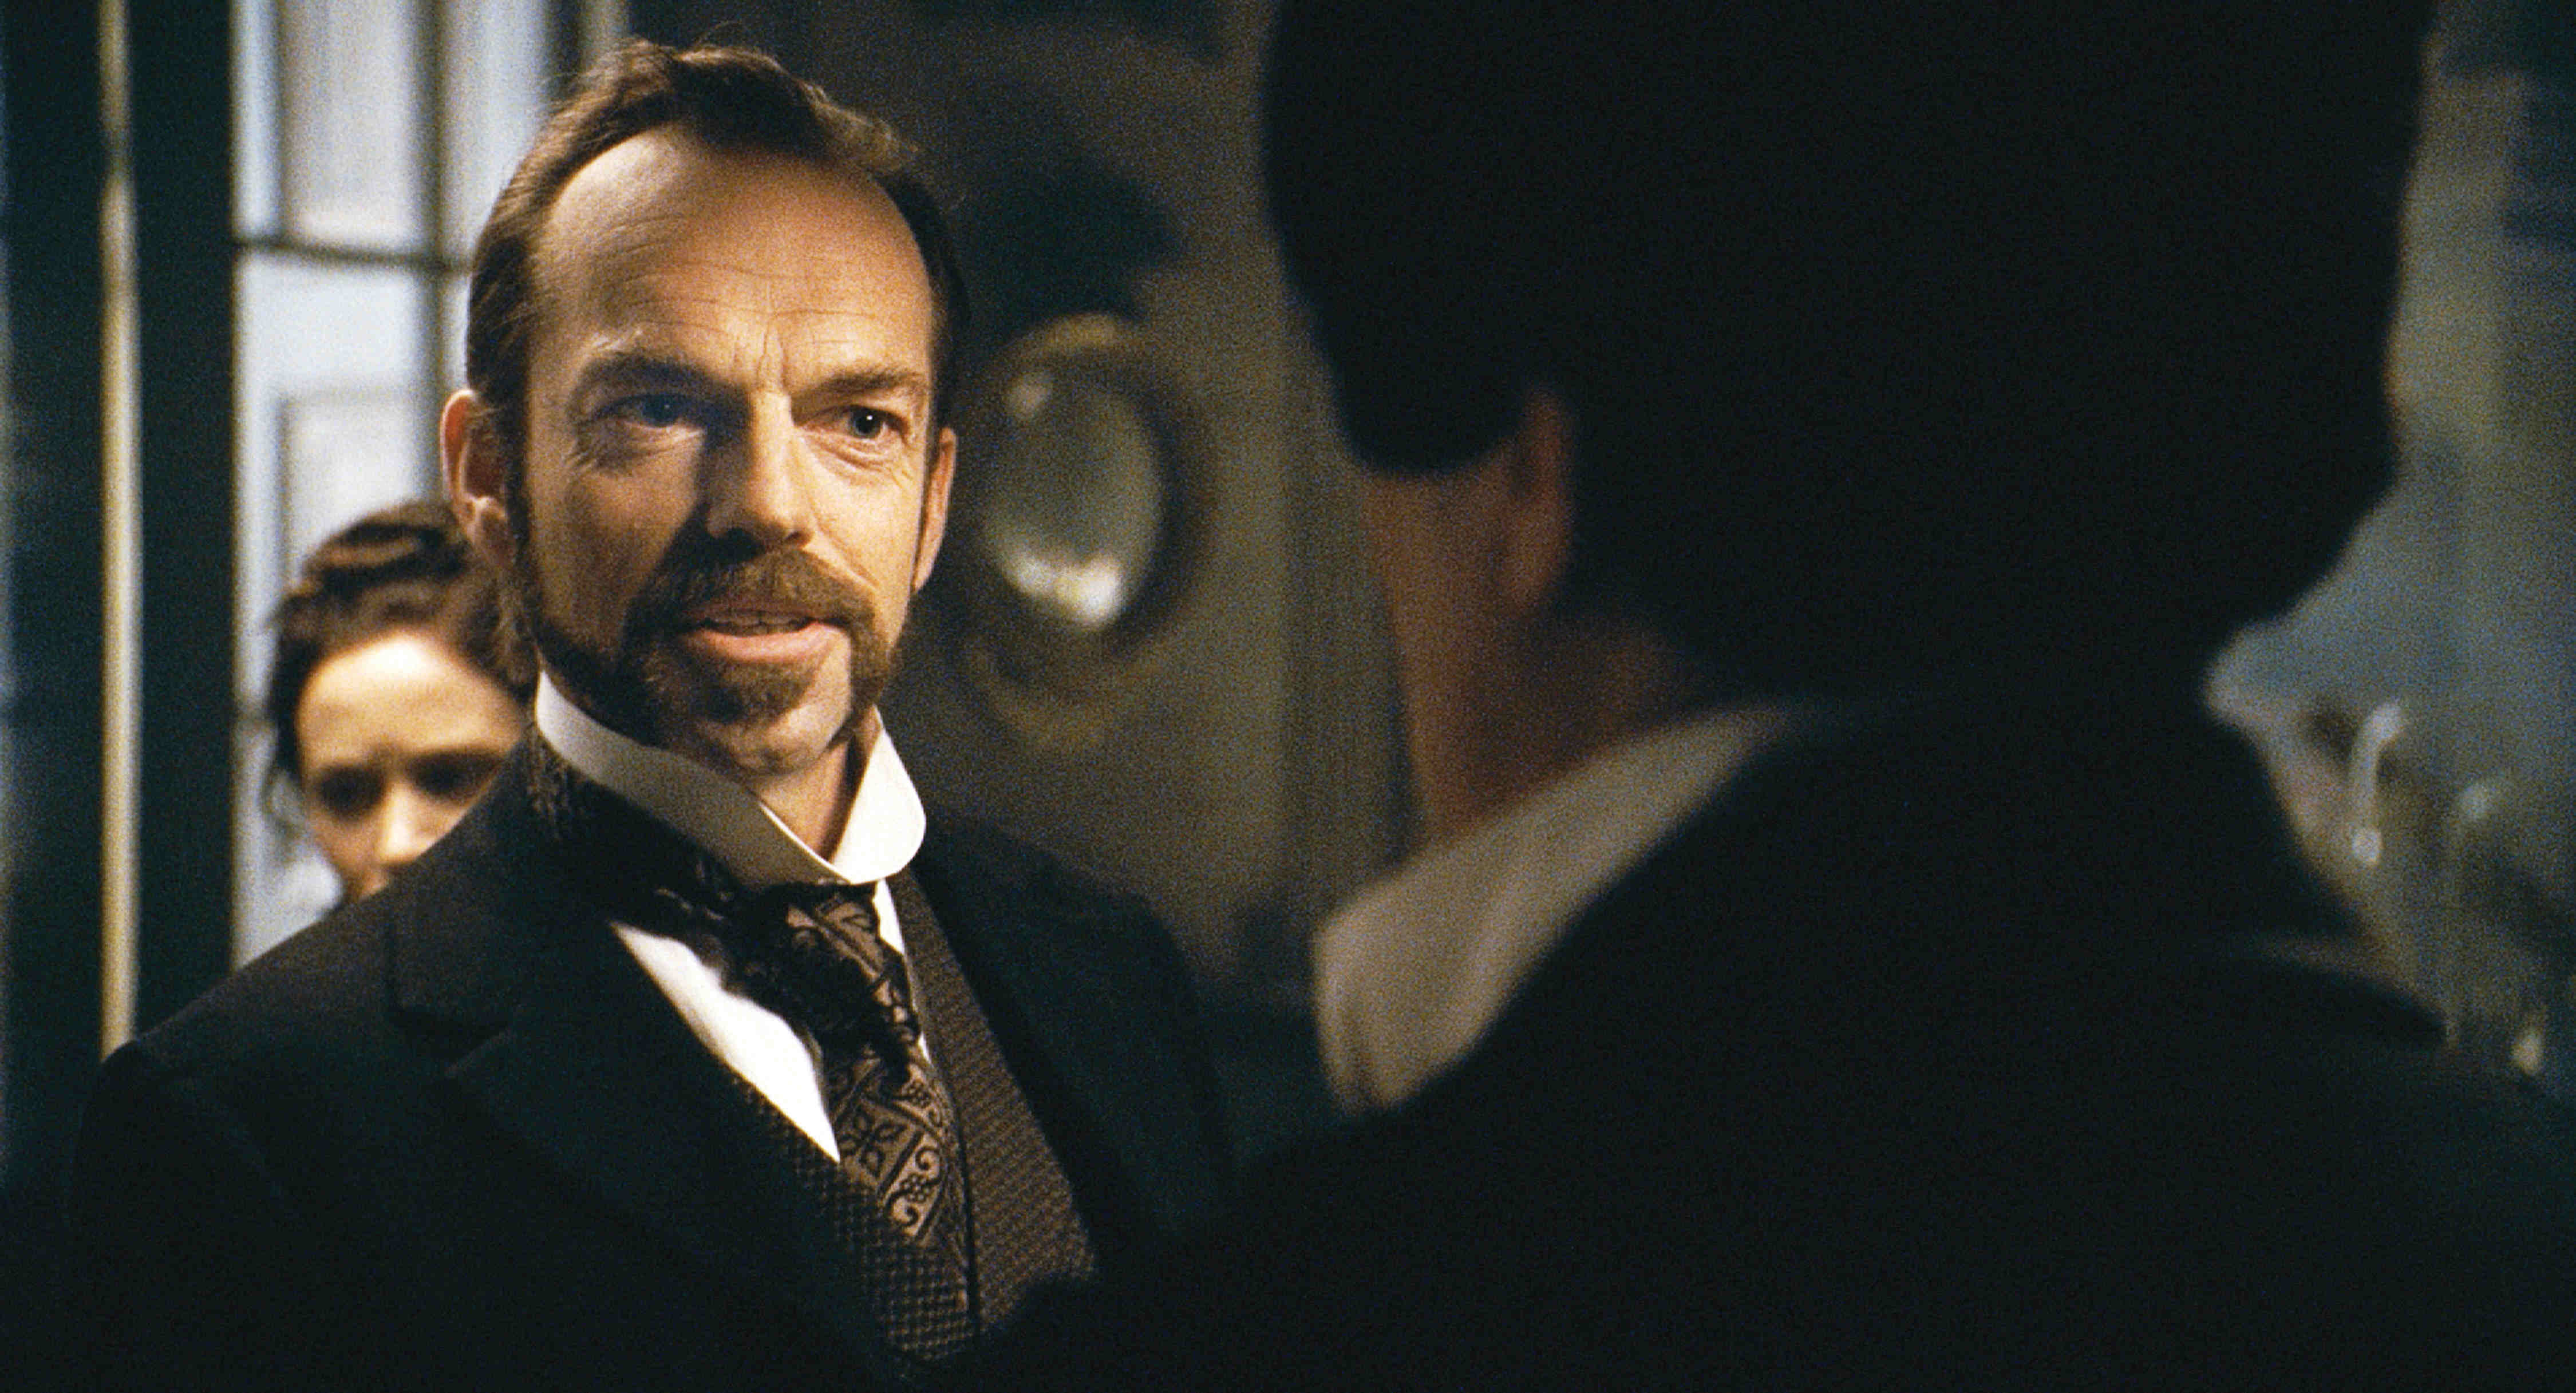 Hugo Weaving stars as Det. Aberline in Universal Pictures' The Wolfman (2009)